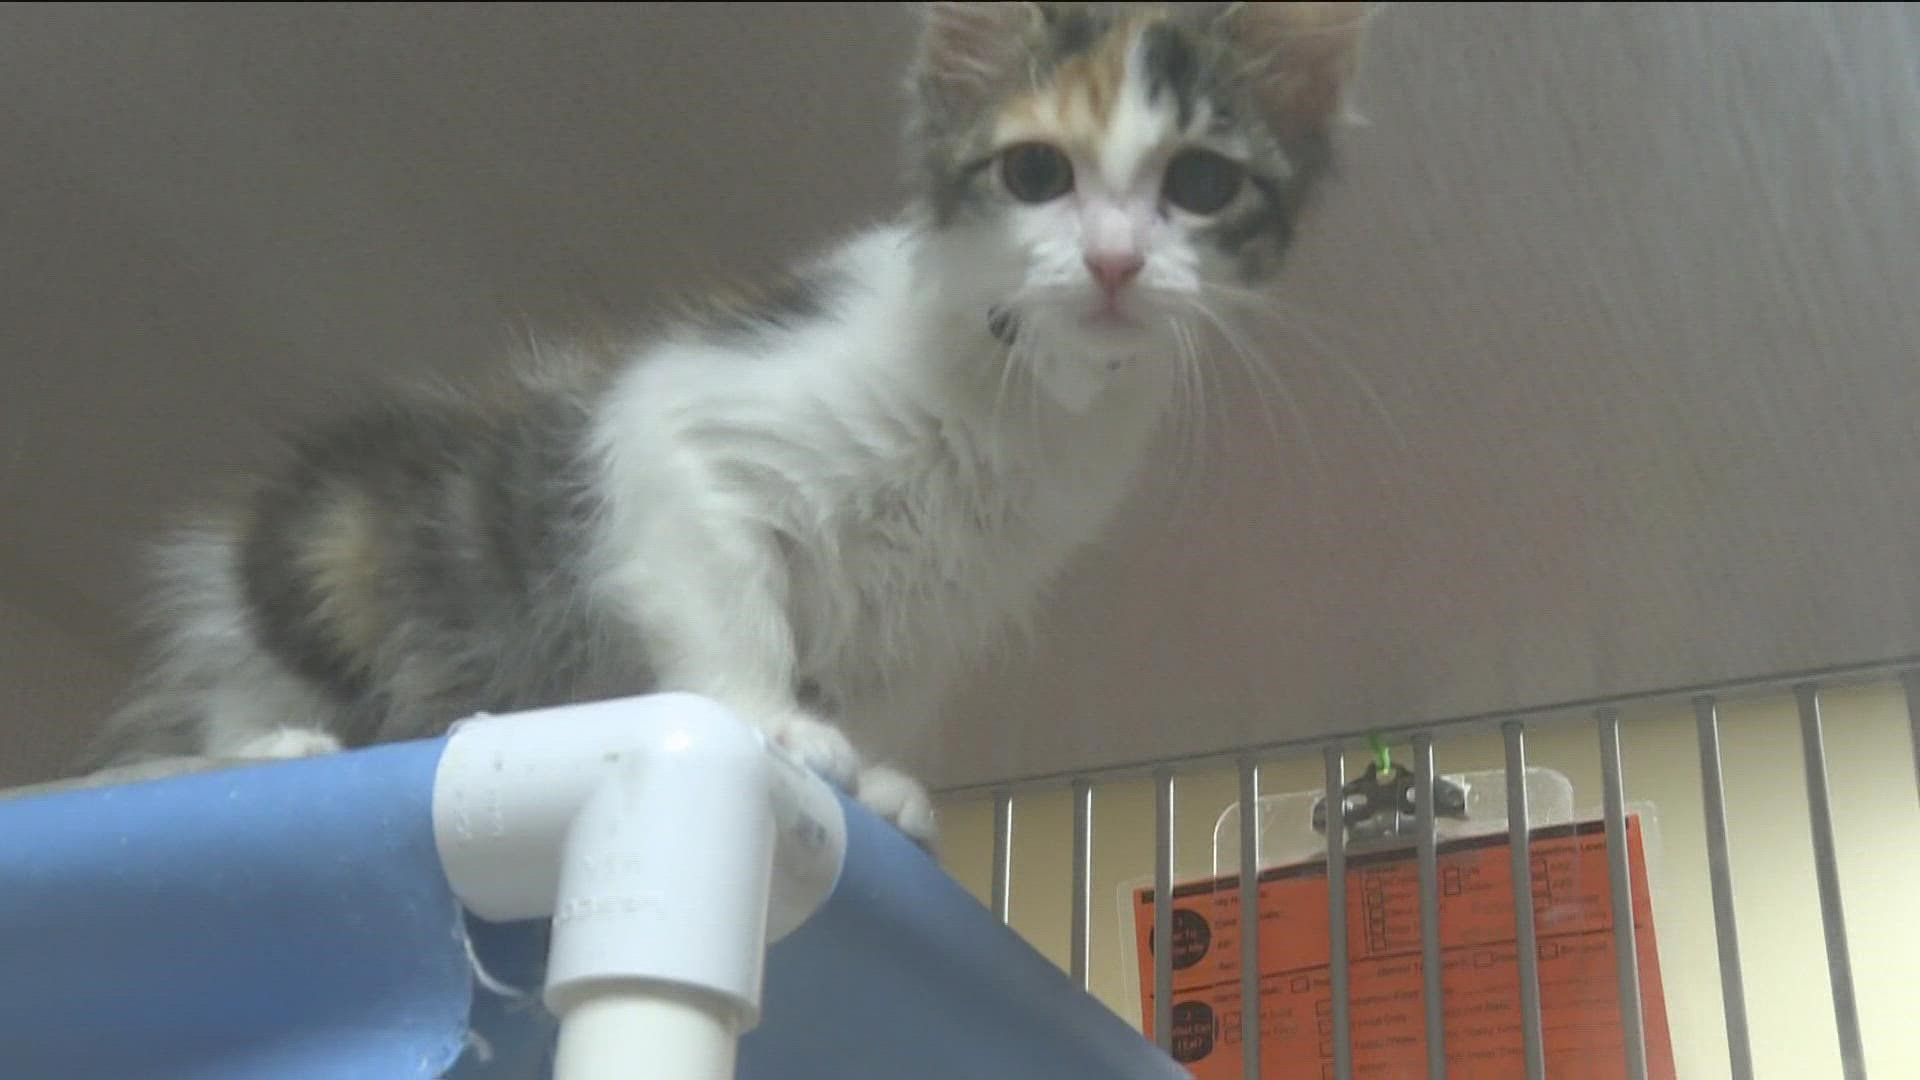 Local shelters in the Valley including the Arizona Humane Society are packed with animals needing a loving home.